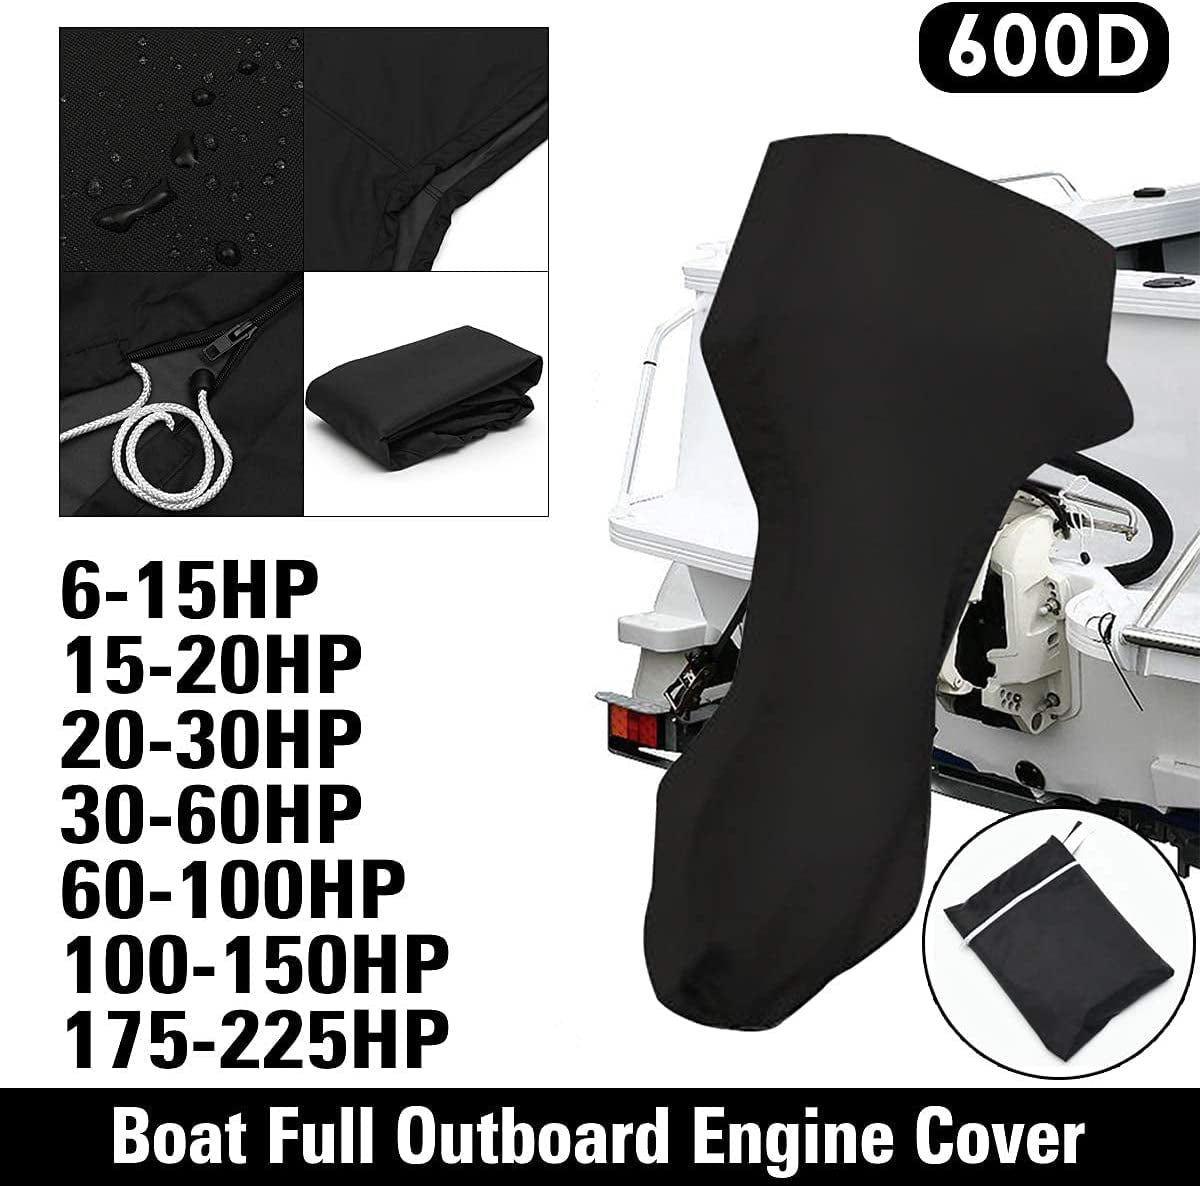 Speedboat Full Outboard Engine Motor Cover Body Fit Up to 6-225HP 600D Black UK Boat Full Outboard Speedboat Engine Cover 